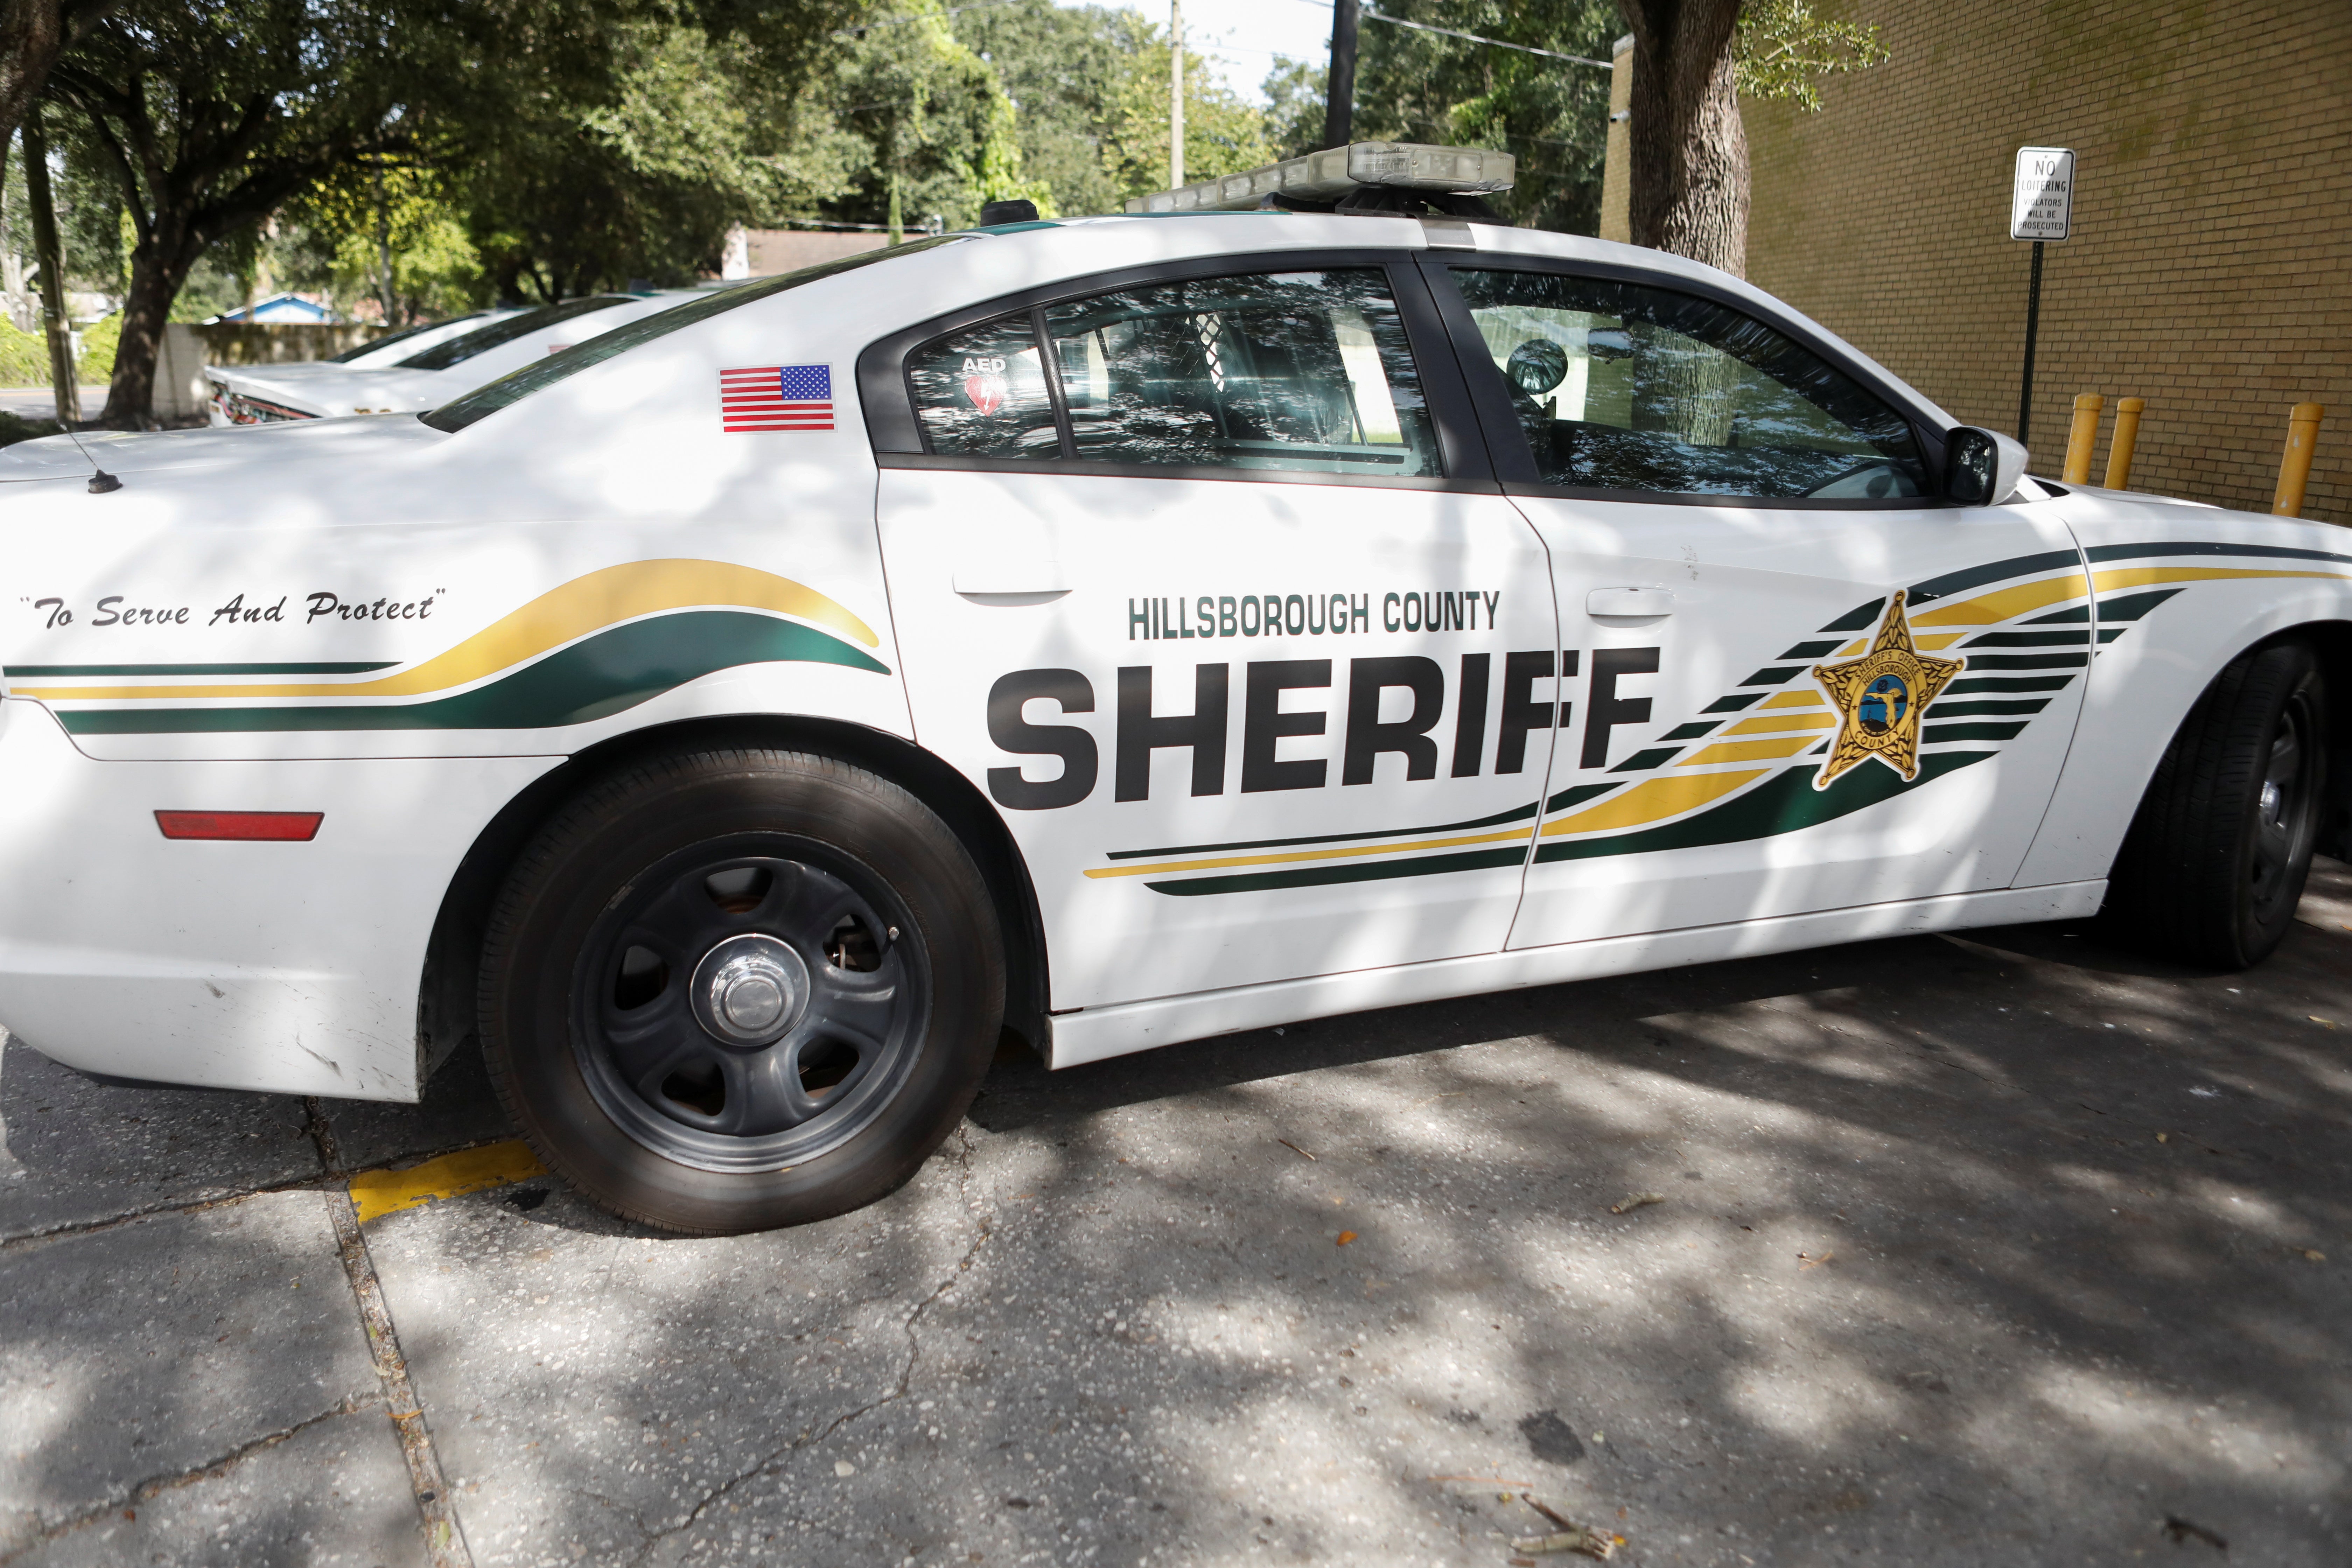 A vehicle of the Hillsborough County Sheriff's Office parked while its members conduct operations in the community in Tampa, Florida.